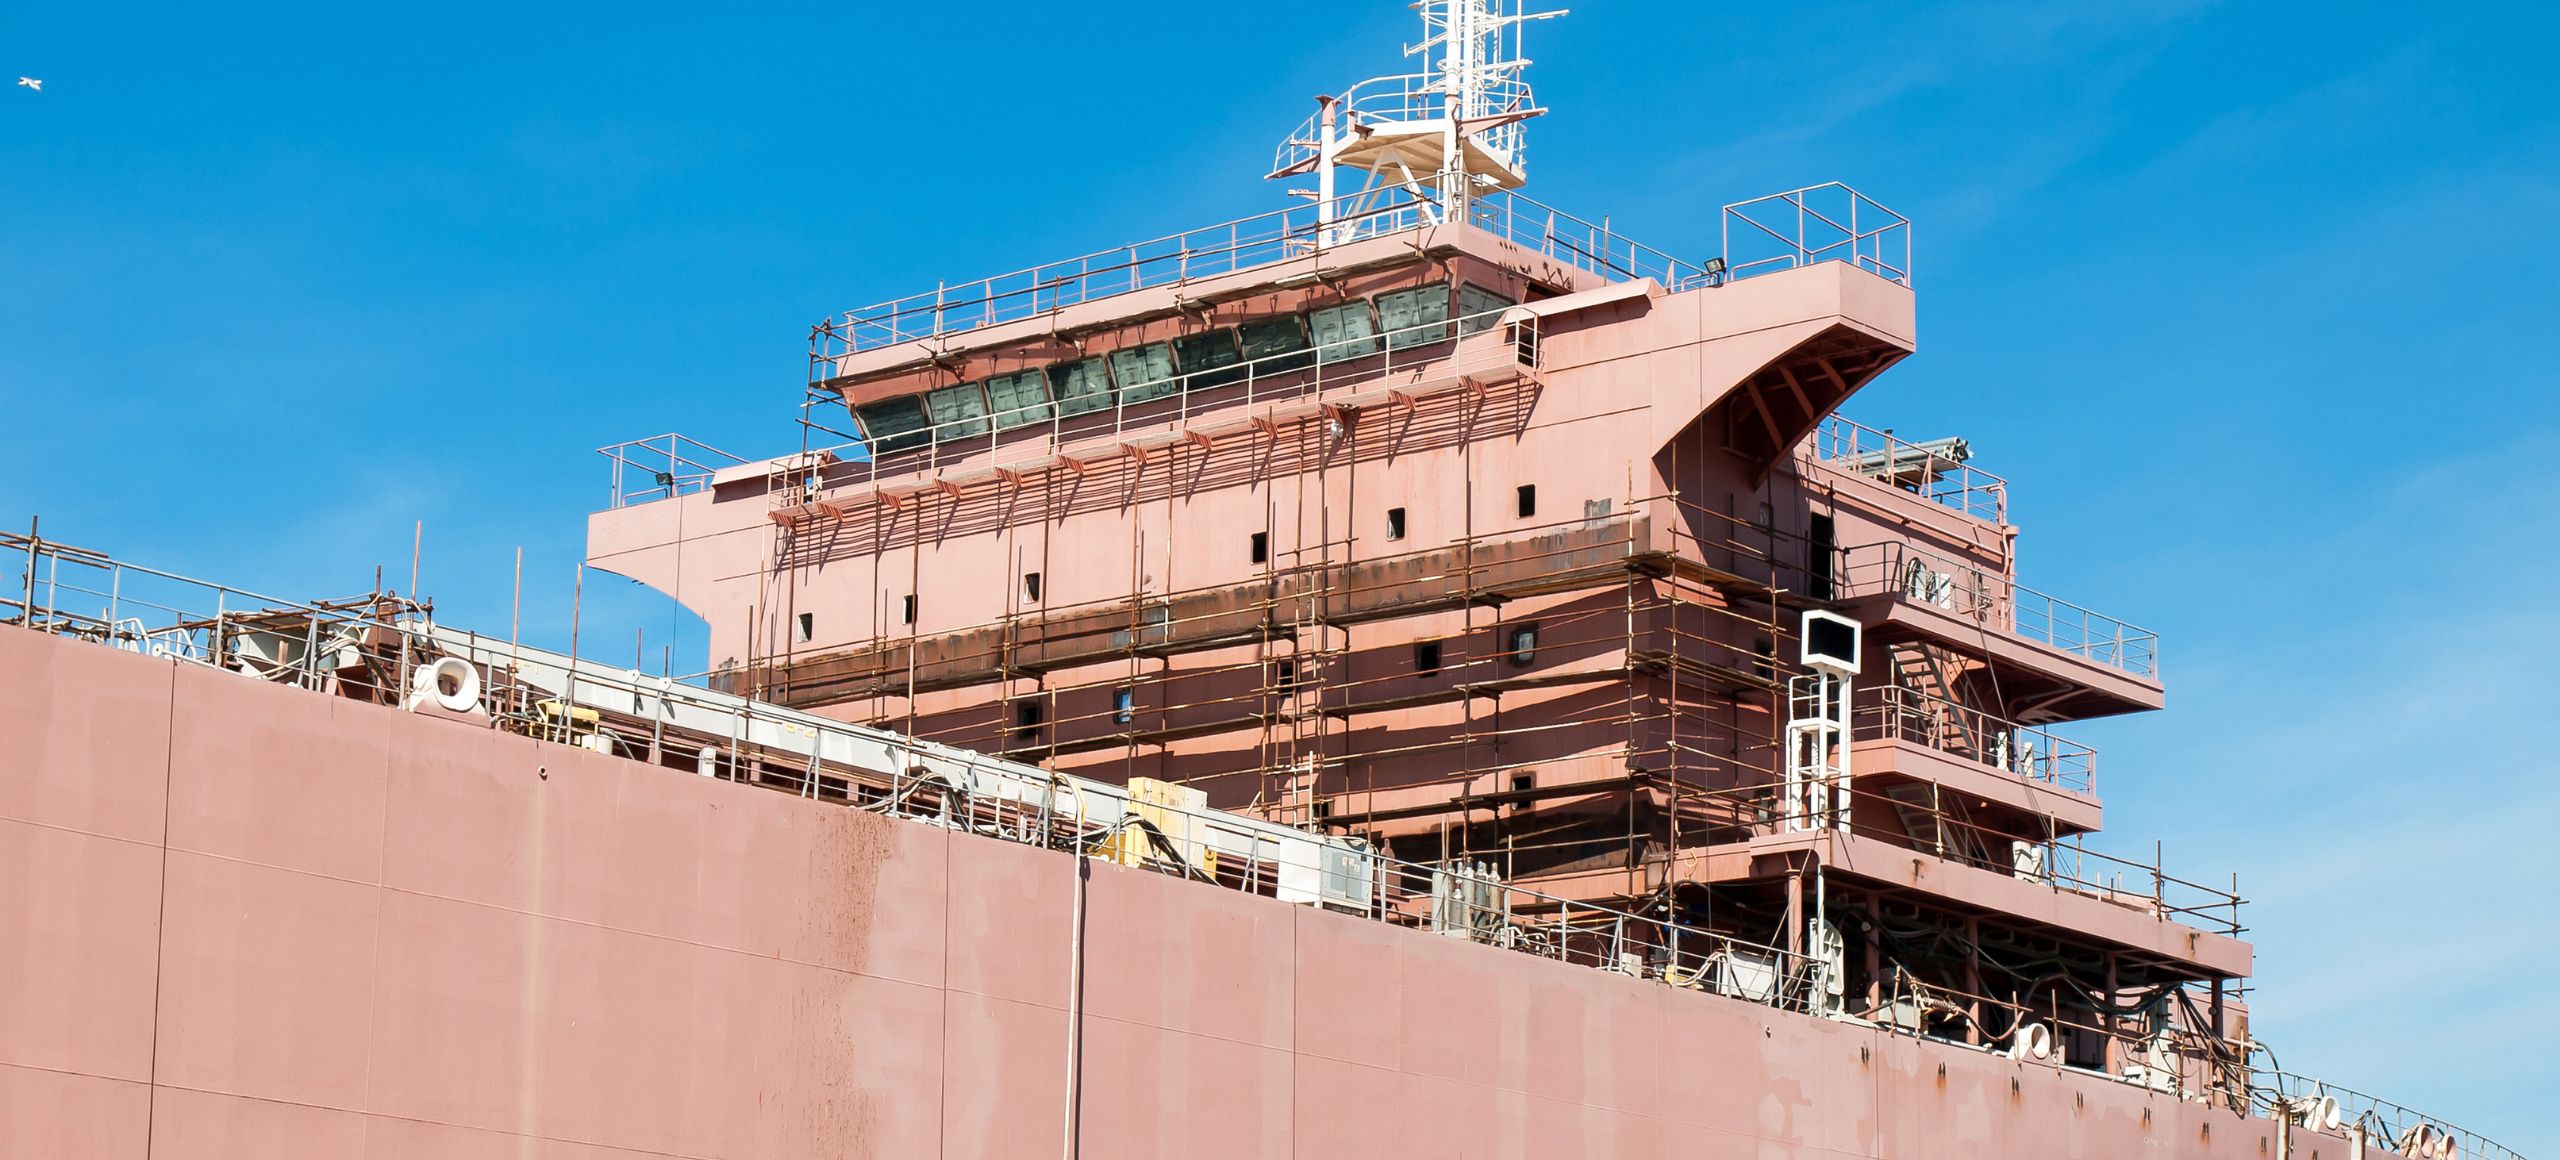 The Role of Shipyards in the Shipbuilding Industry